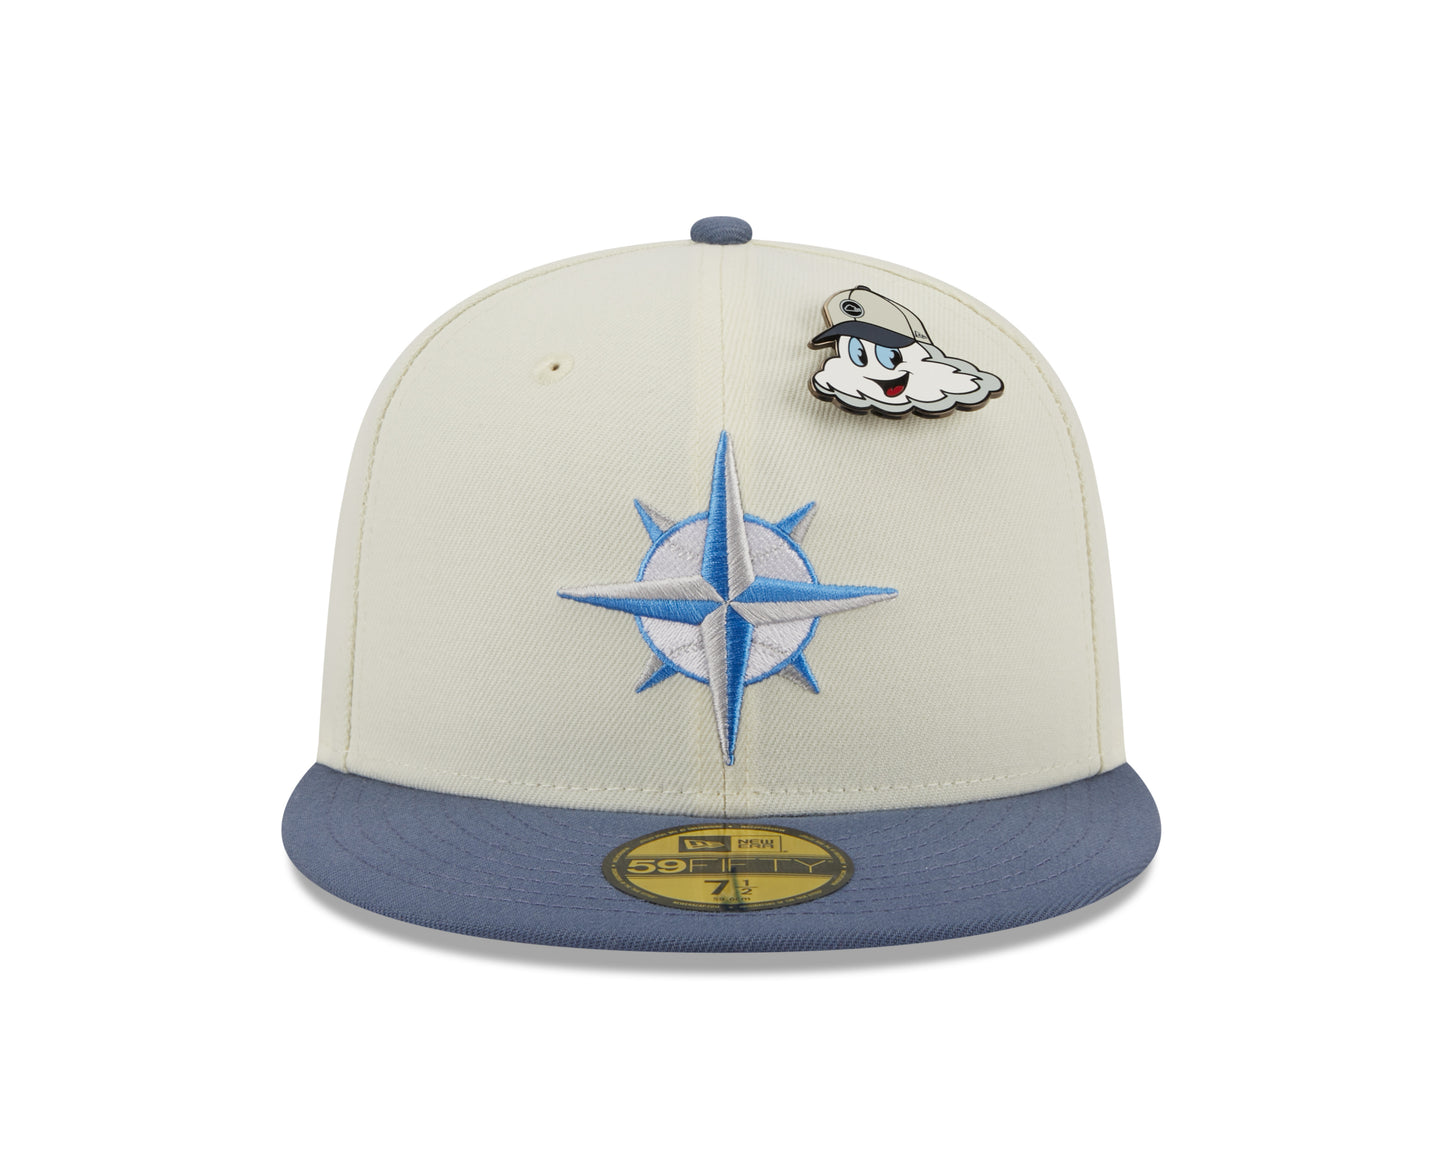 New Era 59fifty Fitted Cap Seattle Mariners THE ELEMENTS - Chrome White/Blue - Headz Up 